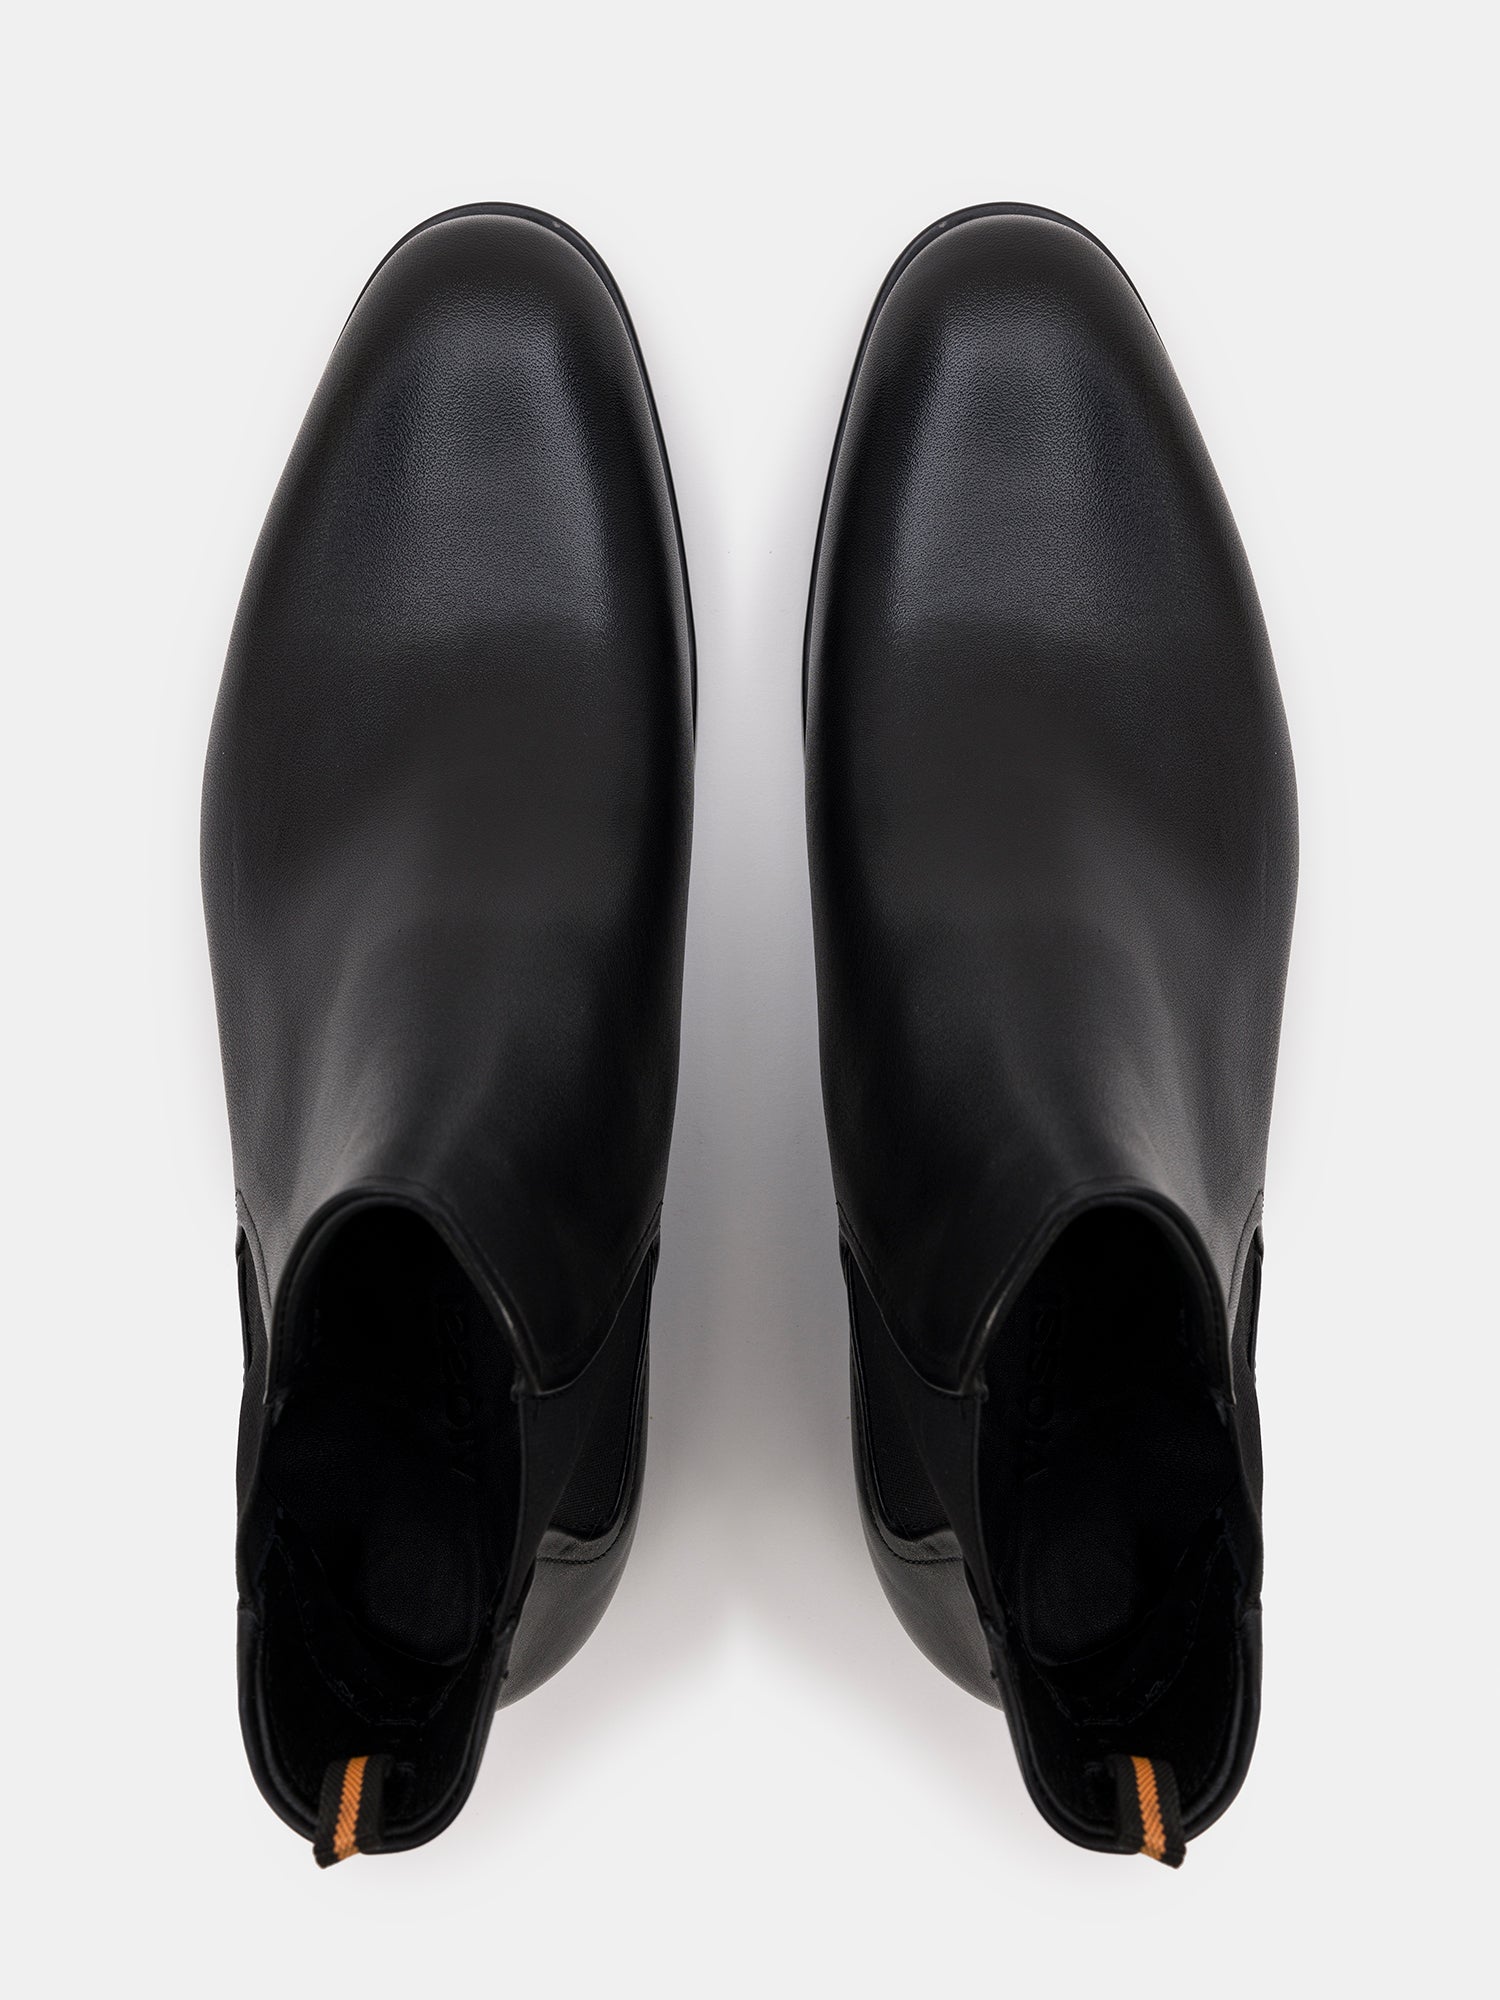 Black Leather Chelsea Boots